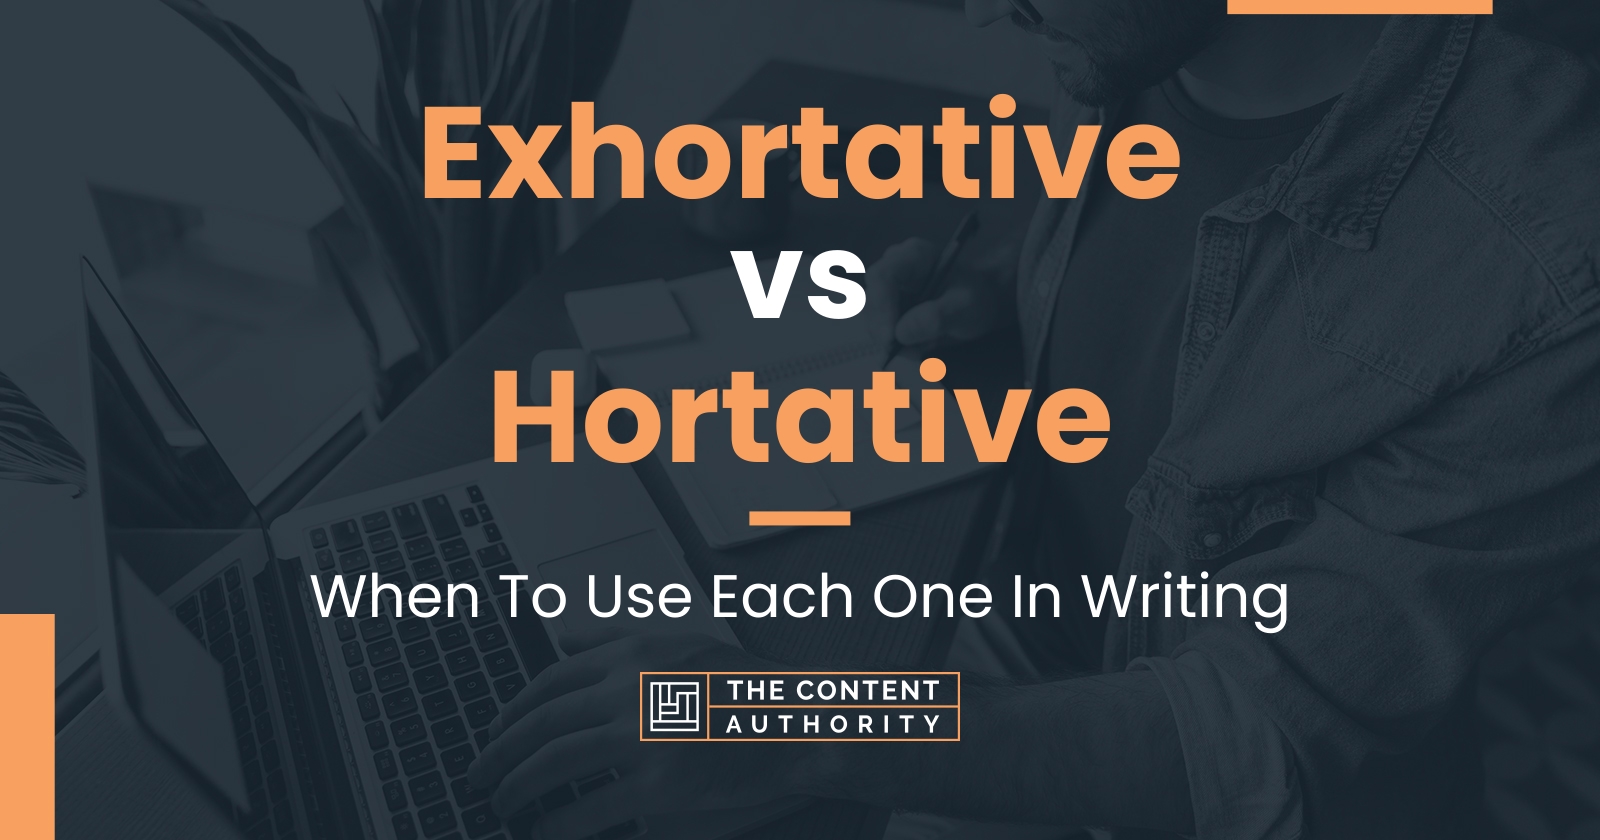 Exhortative vs Hortative: When To Use Each One In Writing